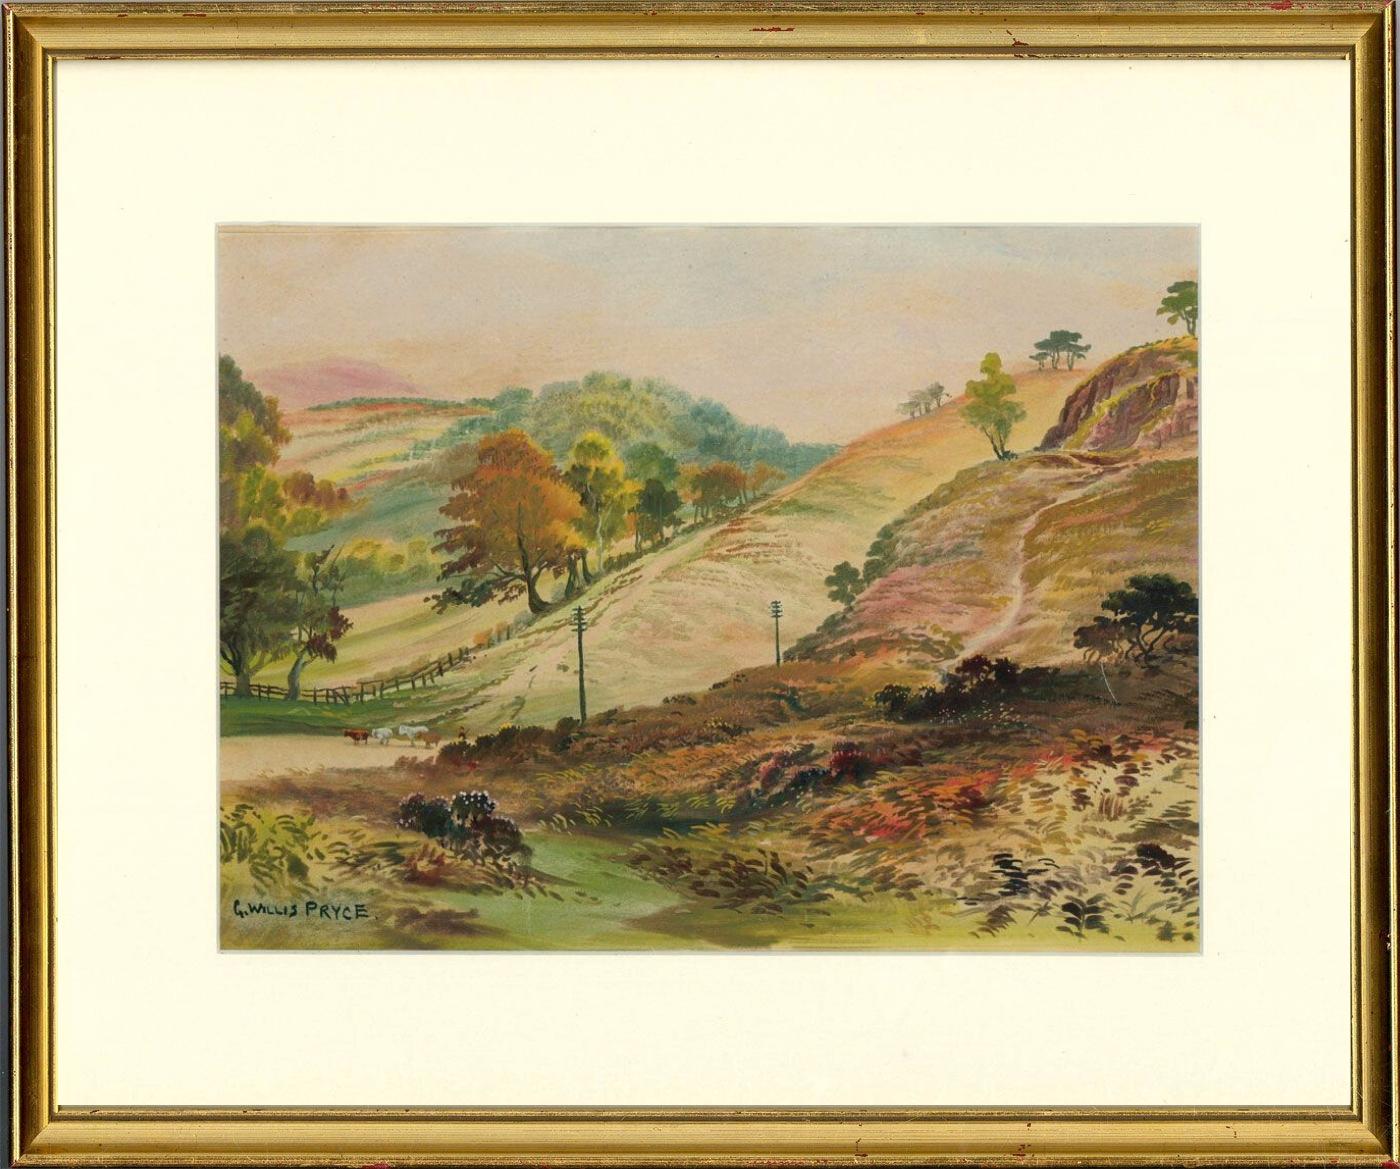 An original early 20th century watercolour by British artist George Willis Pryce, depicting a cattle drover rounding up his herd at the bottom of undulating banks of bracken and grass. Signed by Pryce to the lower Left. Finely mounted in a